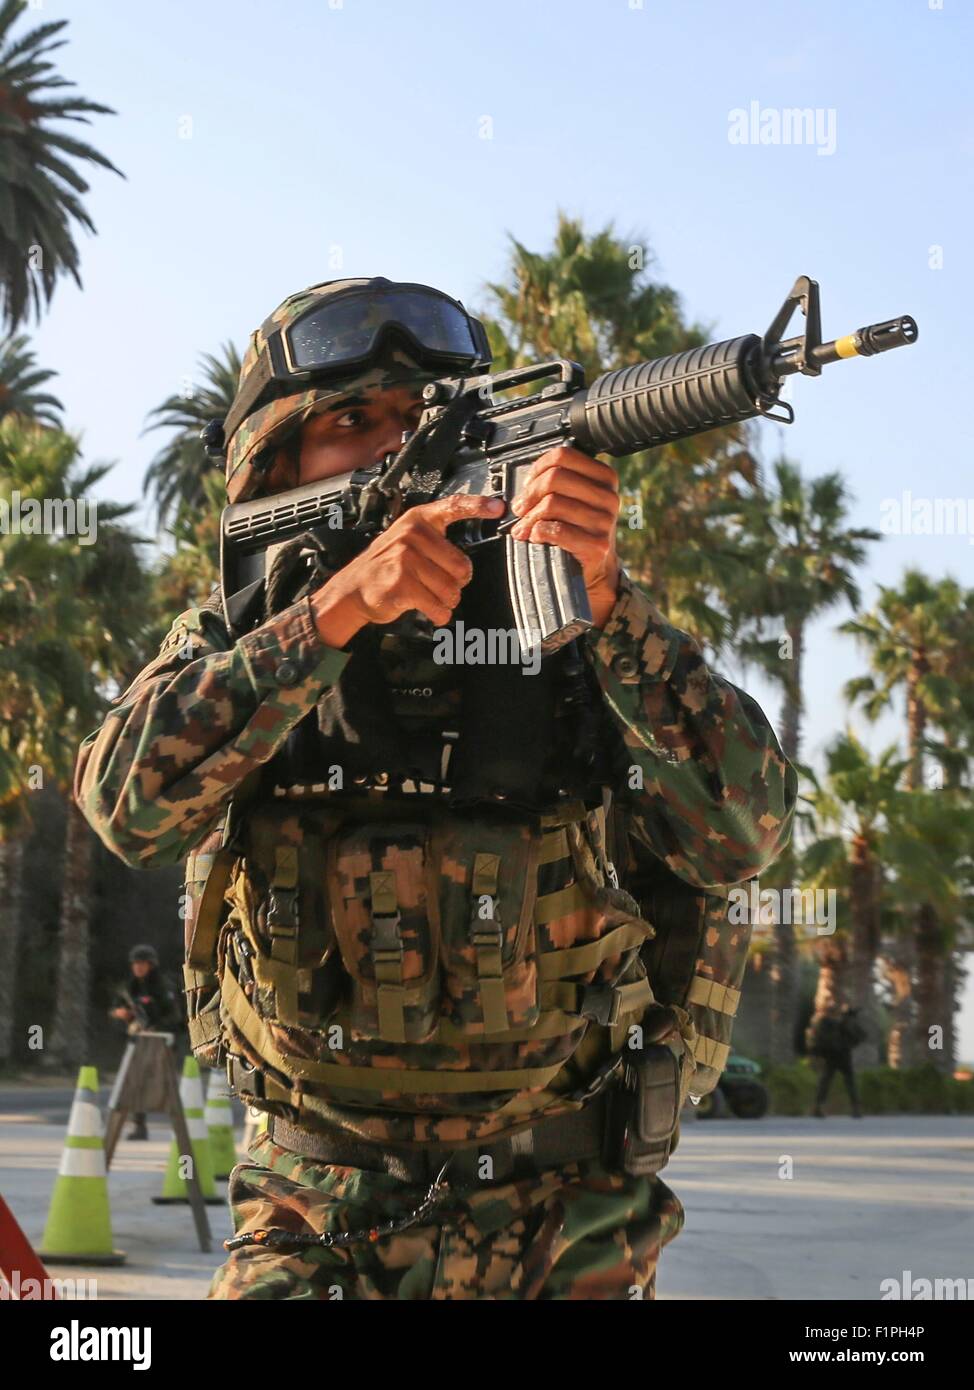 A Marine with Zodiac Battalion, Mexican Naval Infantry Forces during amphibious landing training part of Exercise Dawn Blitz at Marine Corps Base Camp Pendleton September 5, 2015 in San Deigo, California.  The exercise include Japan, Mexico and New Zealand to strengthen operations in joint amphibious operations. Stock Photo